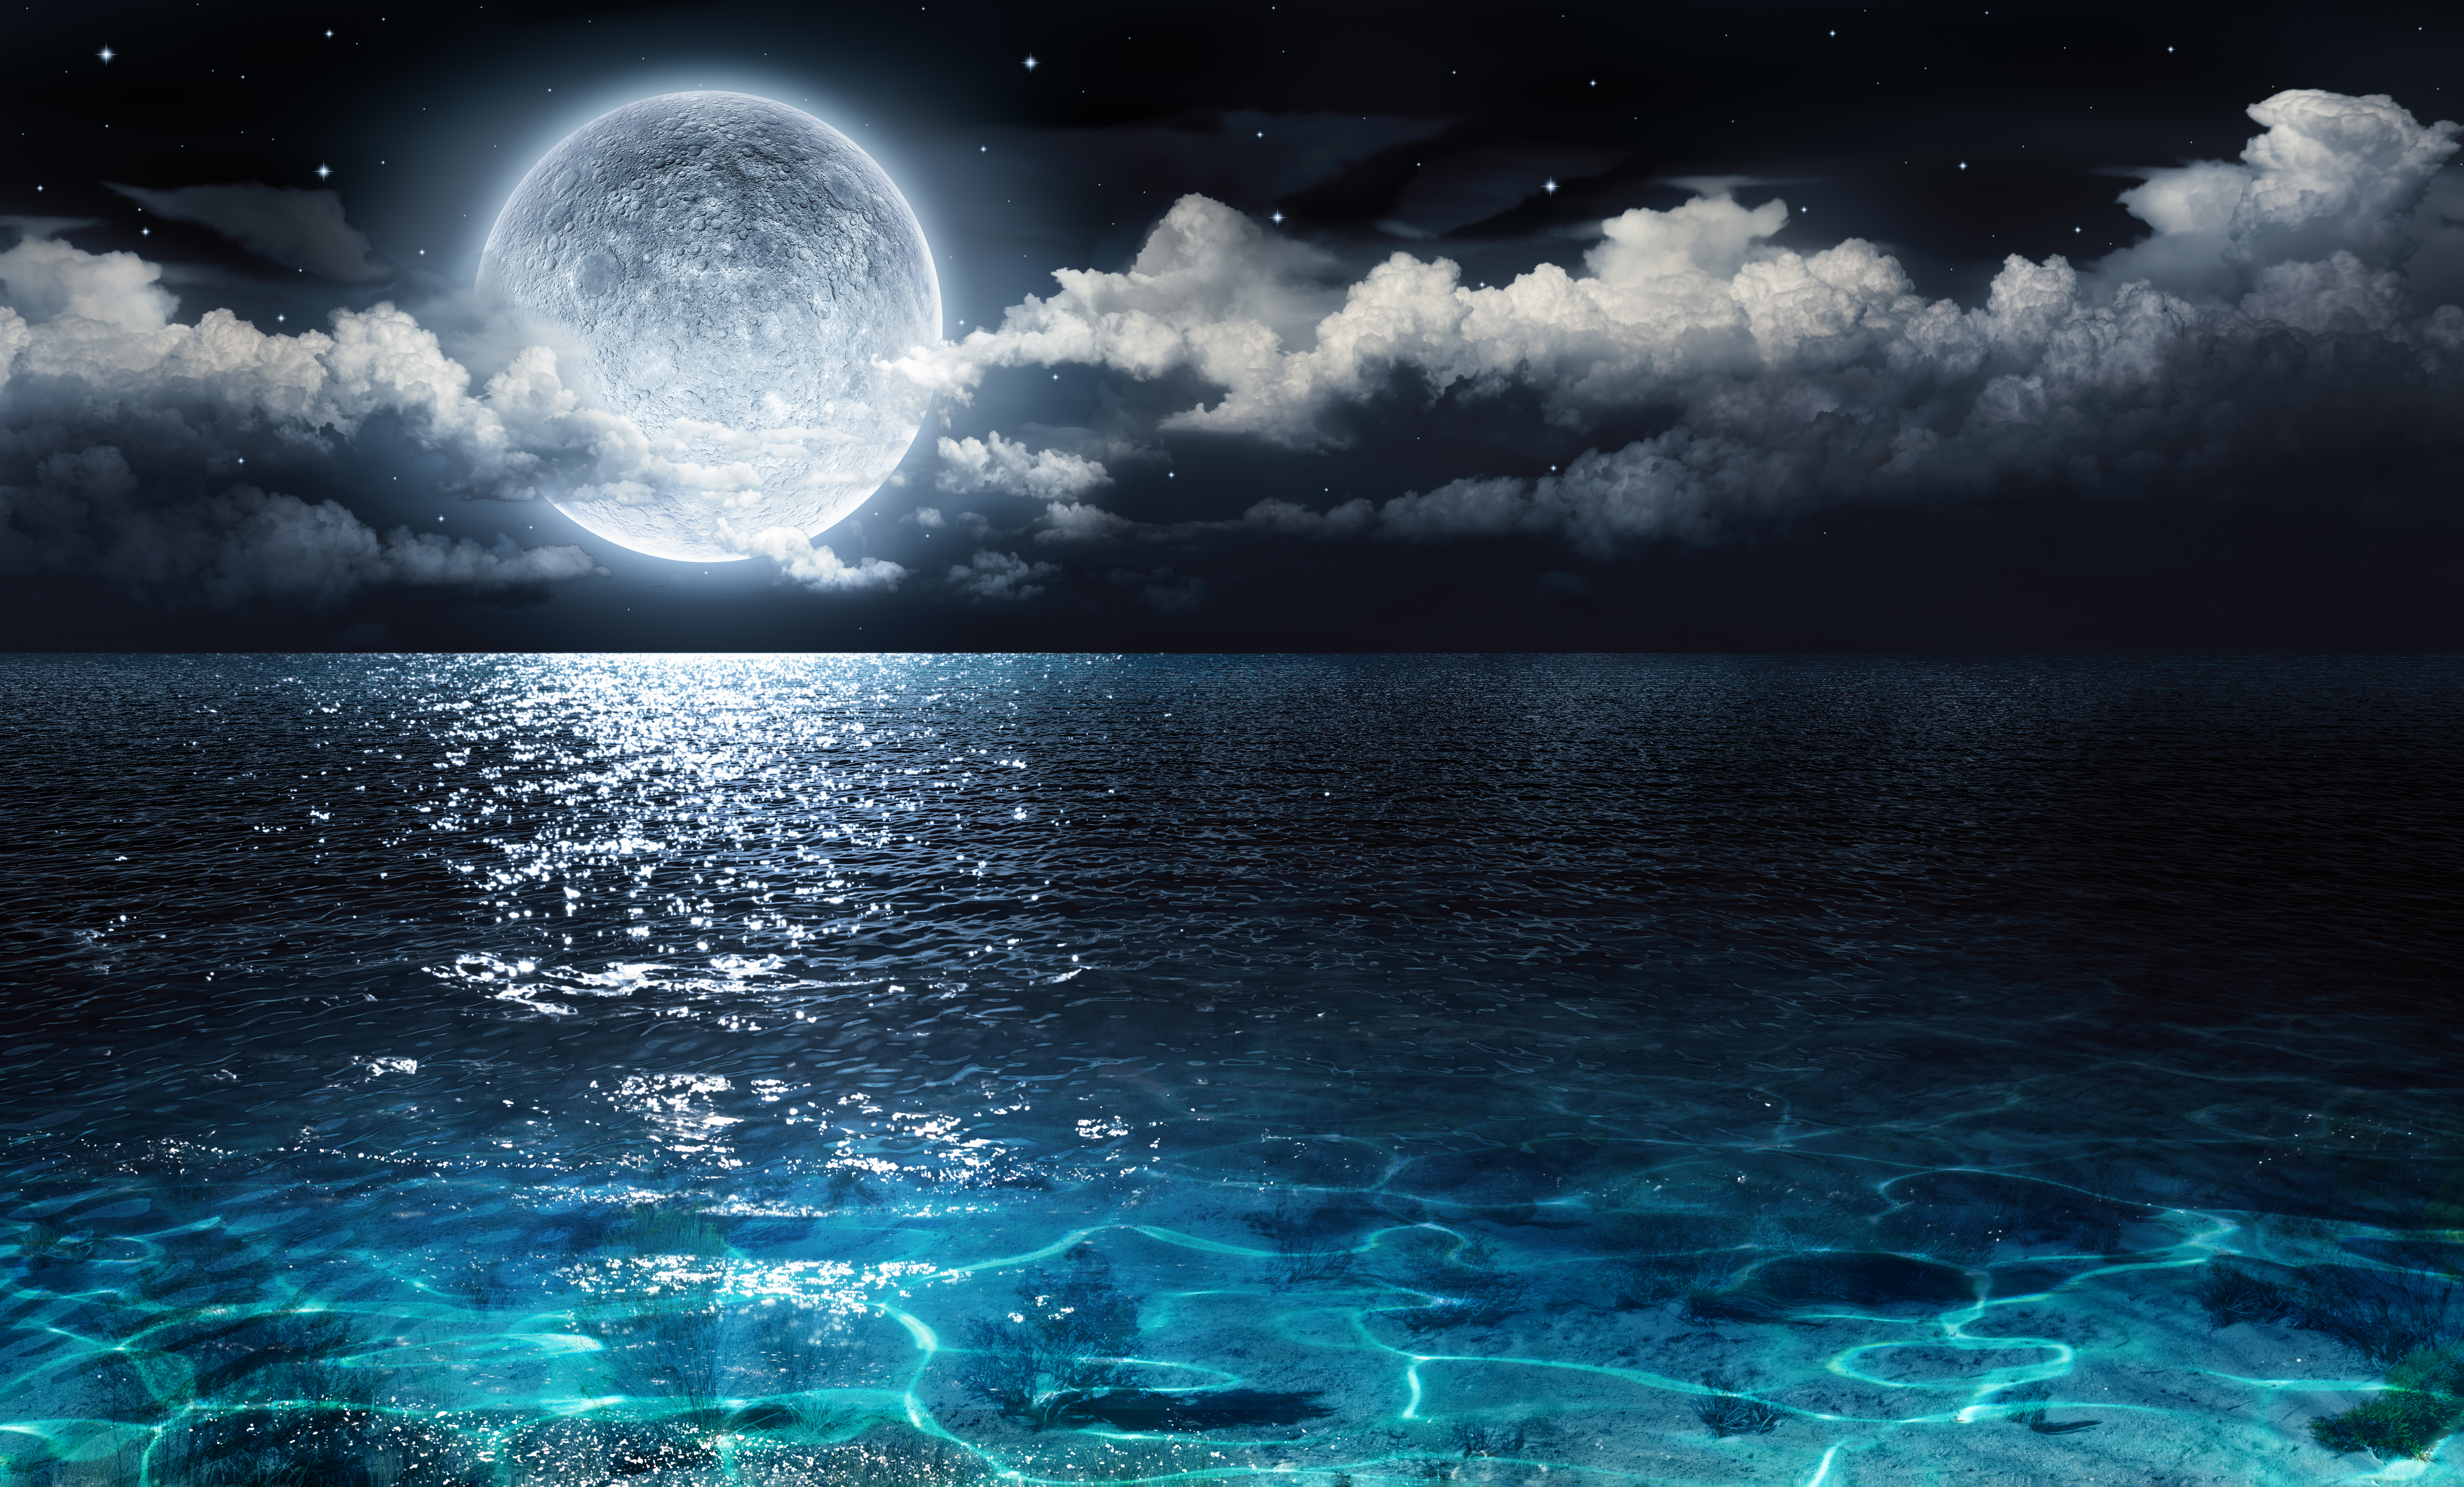 Moon in the night sky over water